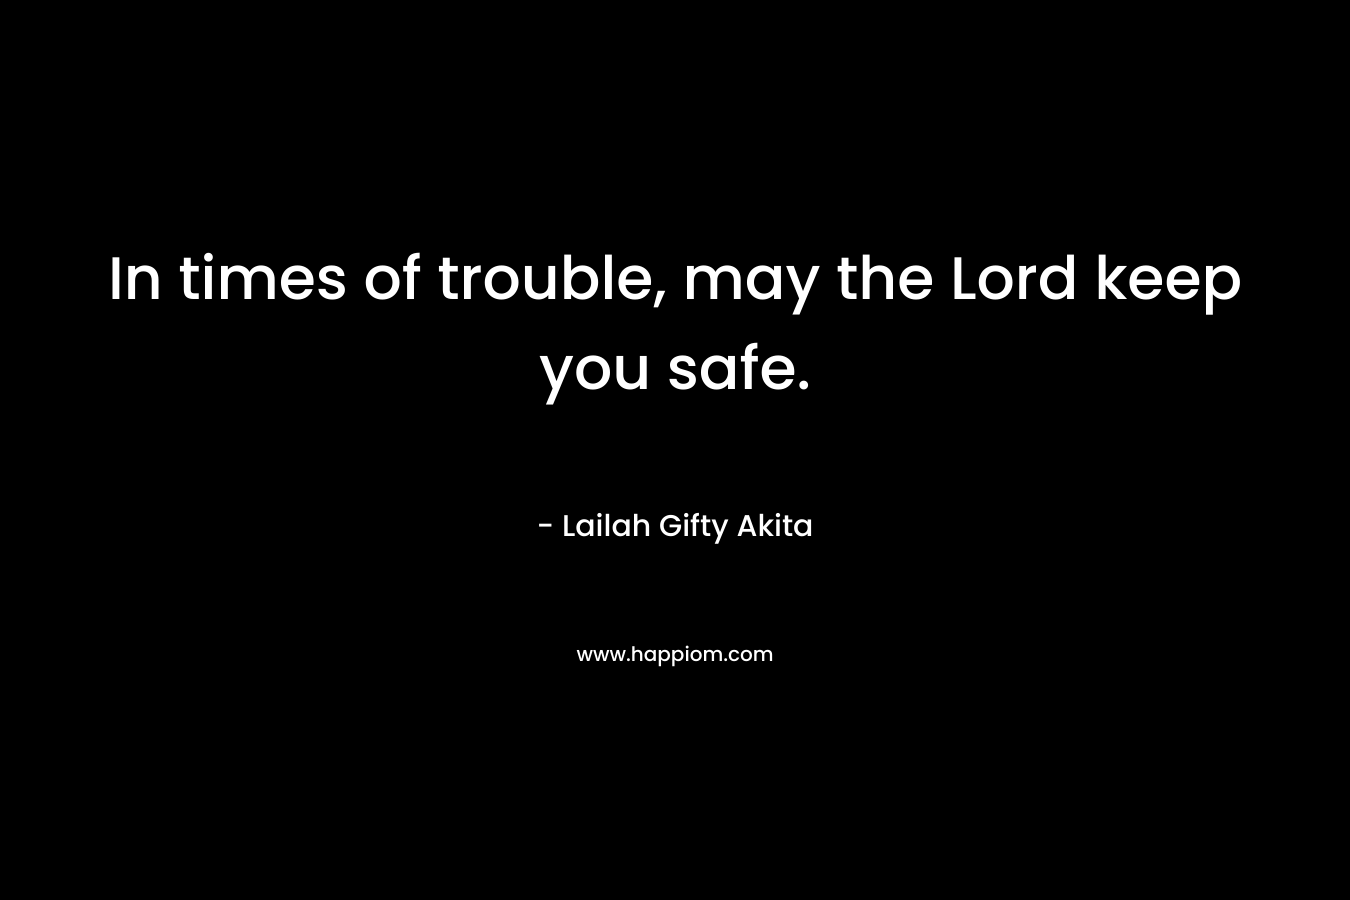 In times of trouble, may the Lord keep you safe.